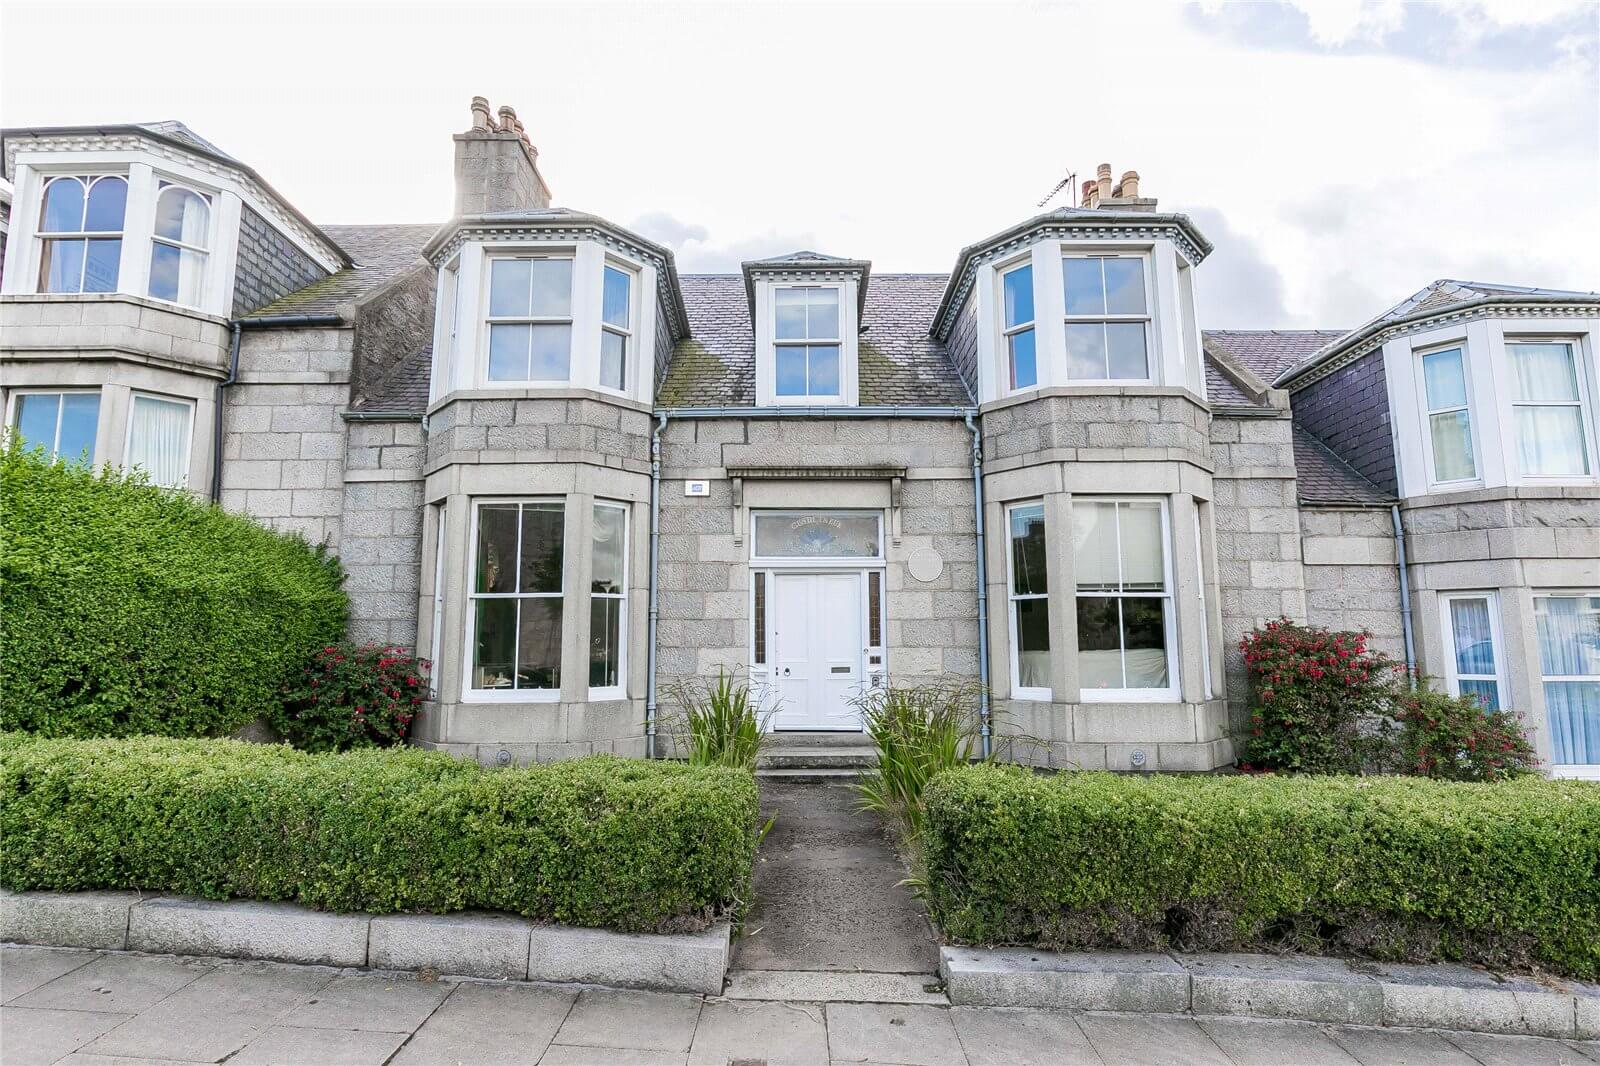 Our latest properties for sale and to let (17th September 2019)